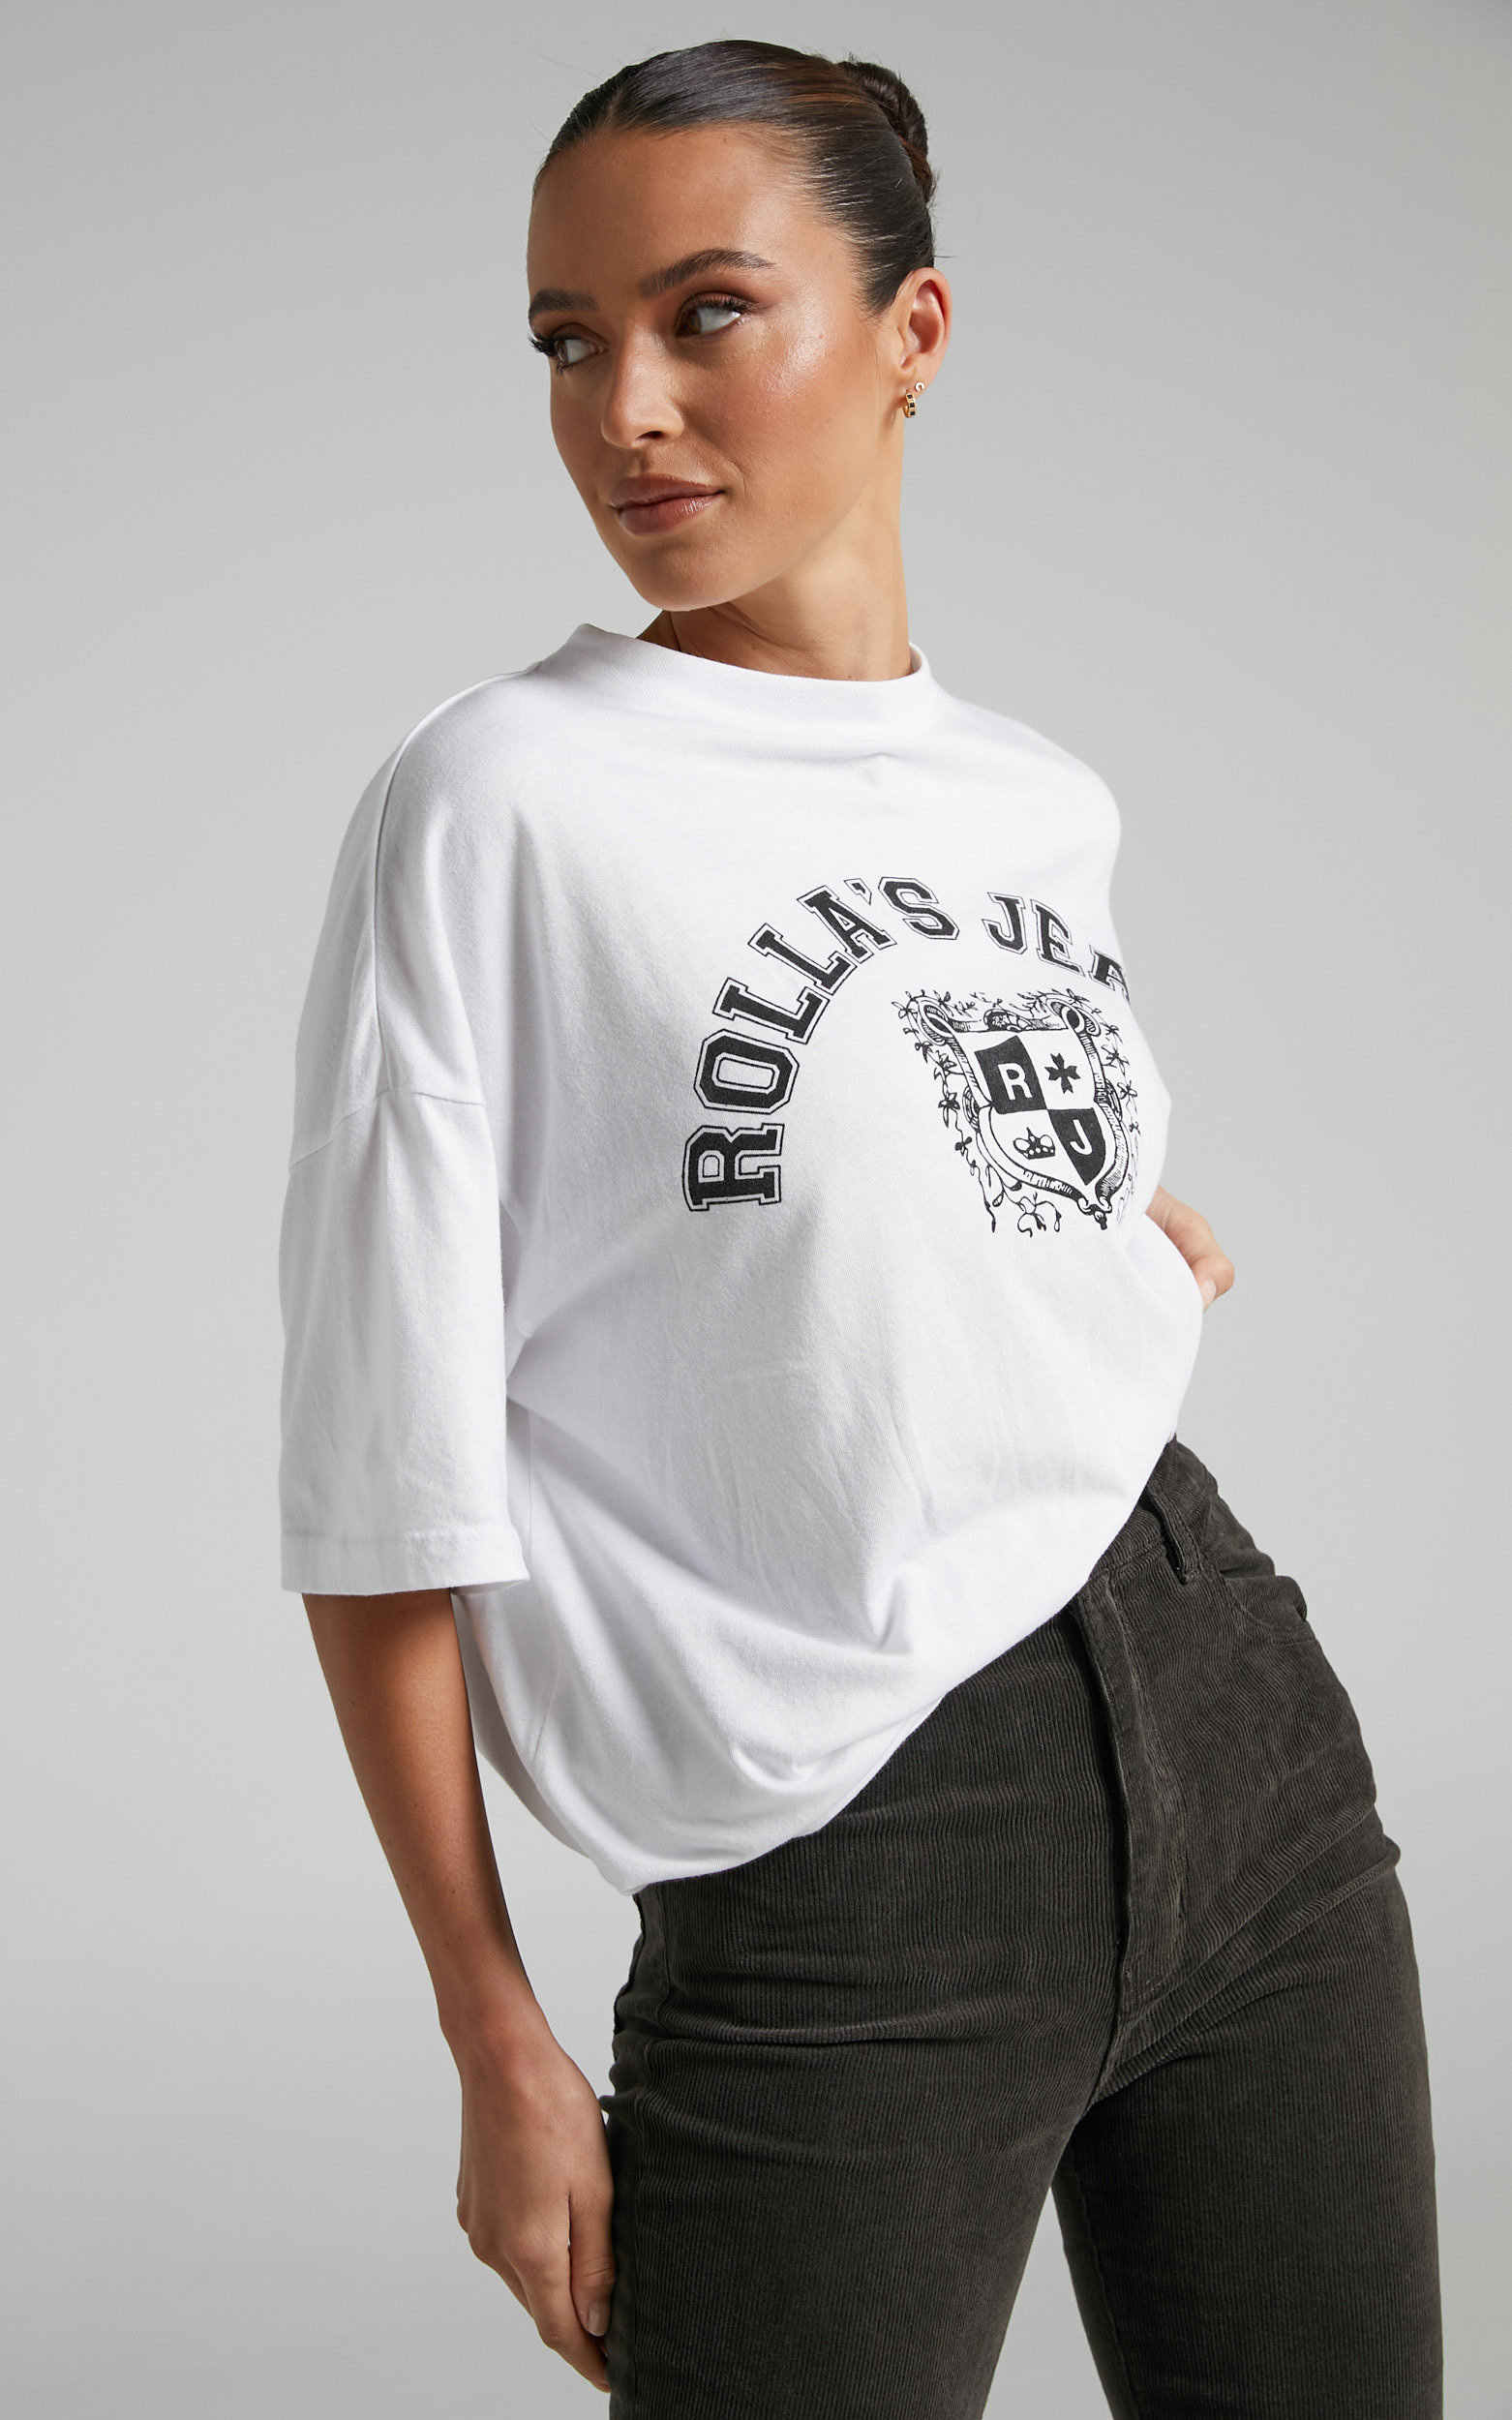 Phoebe Tonkin x Rolla's - GRADUATE SUPER SLOUCH TEE in White - L, WHT1, hi-res image number null